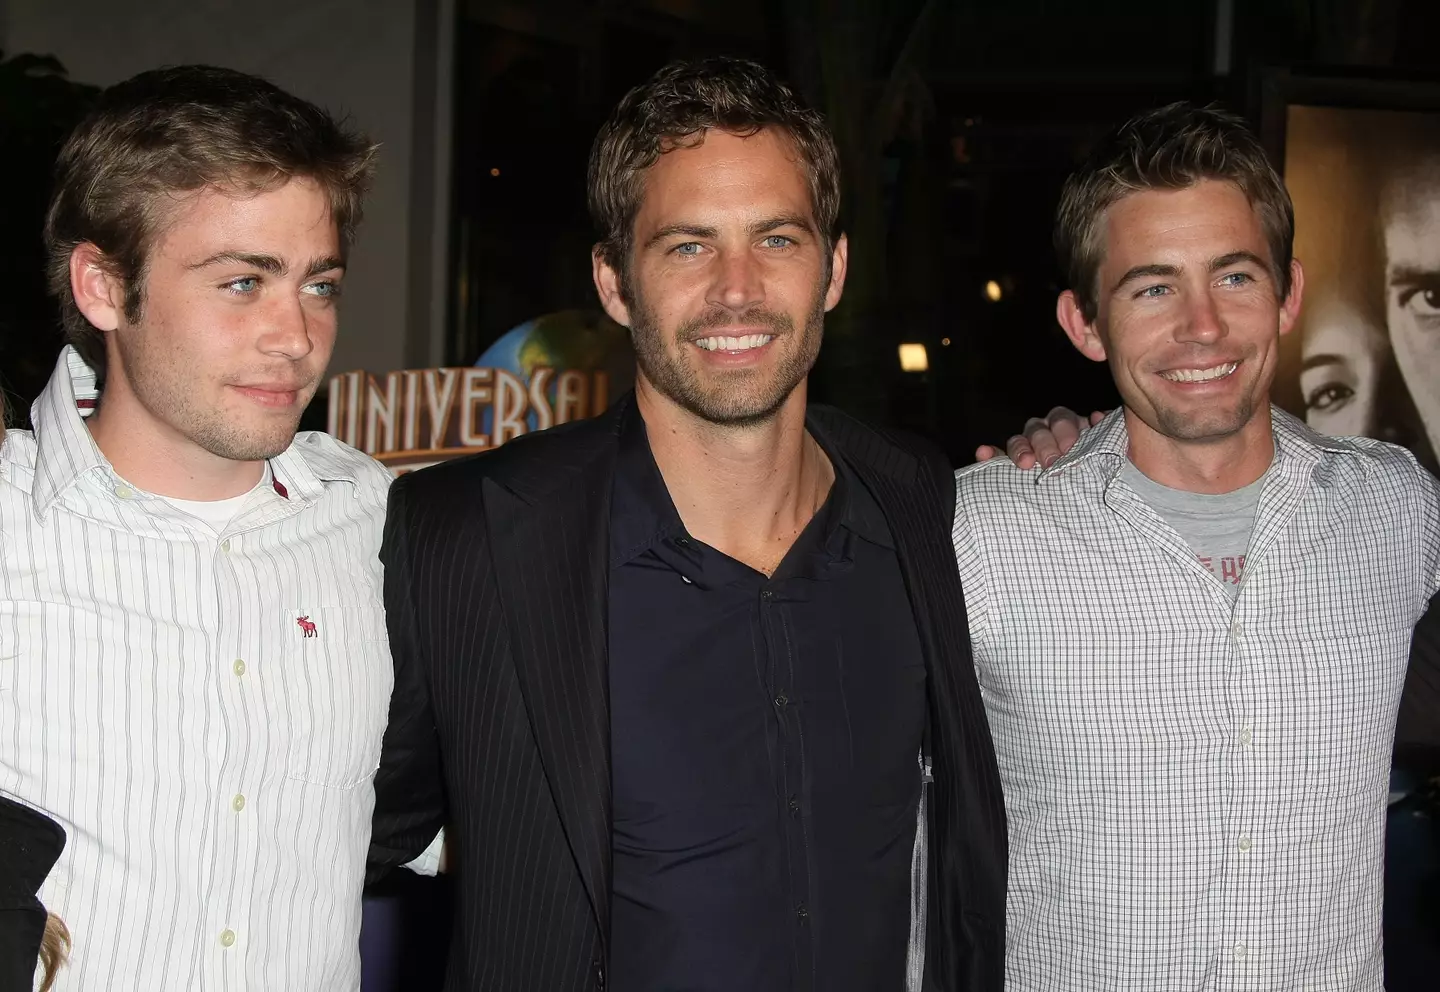 Paul Walker had two younger brothers - Cody (L) and Caleb (R).